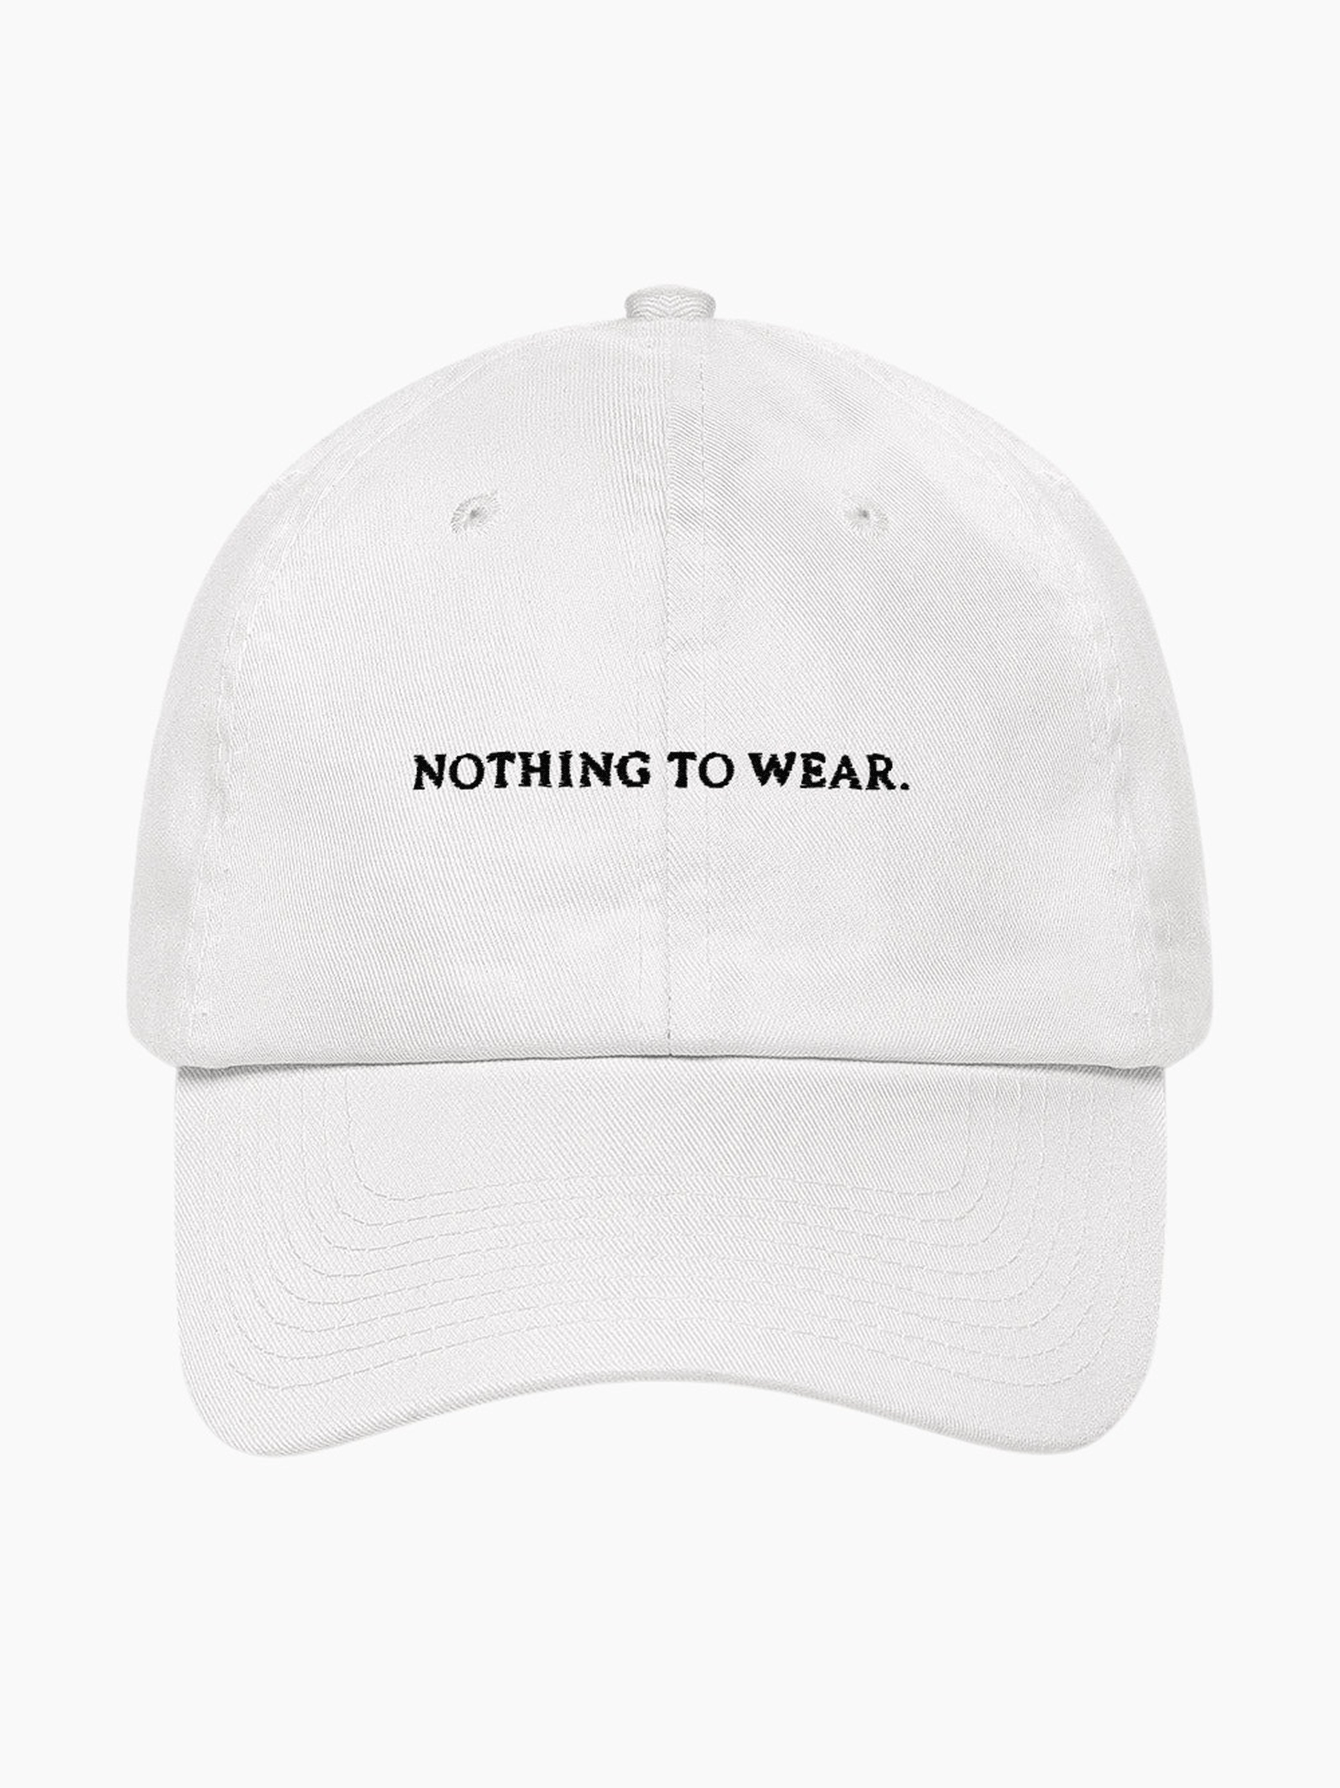 Nothing To Wear Cap